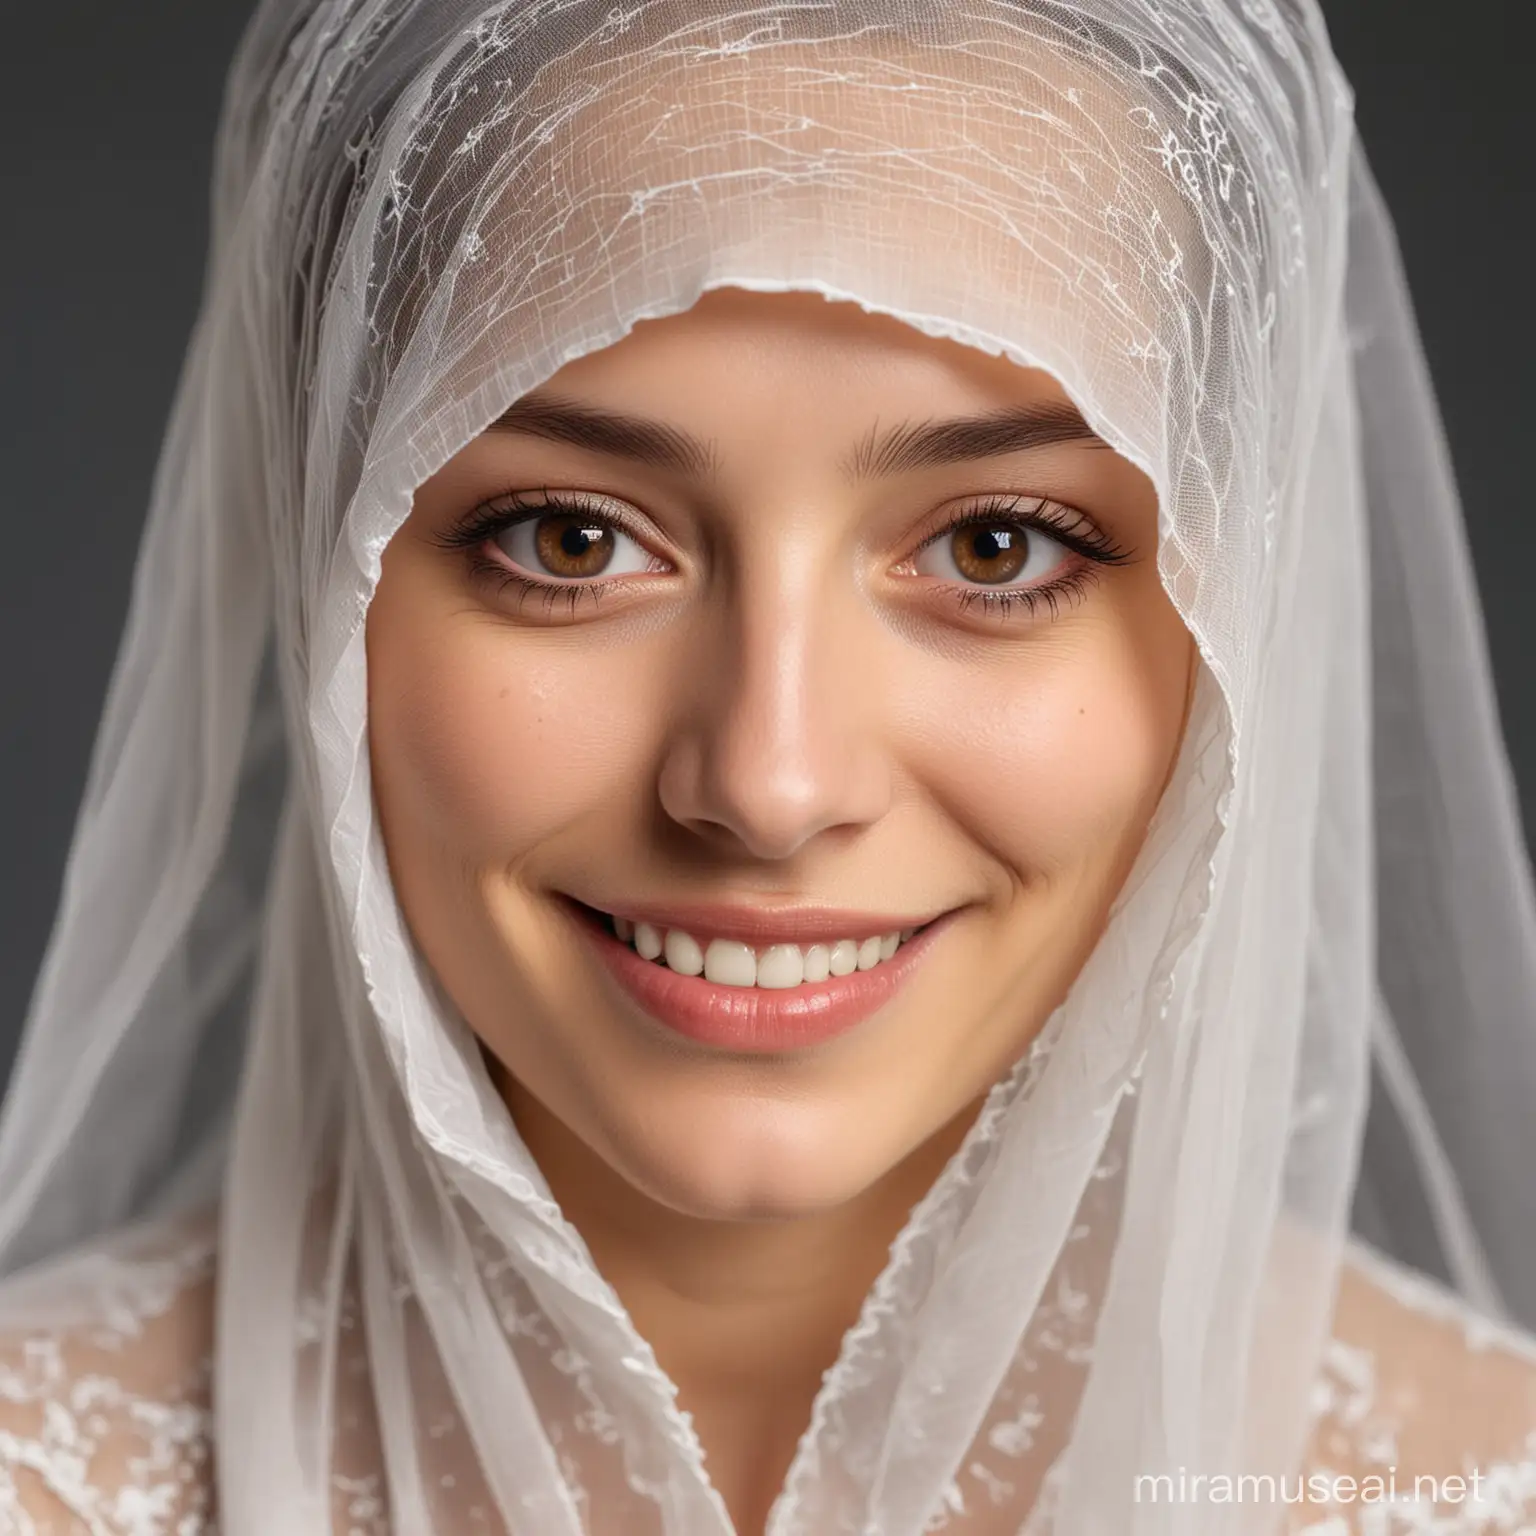 Portrait of a FairSkinned Veiled Woman with Strong Gaze